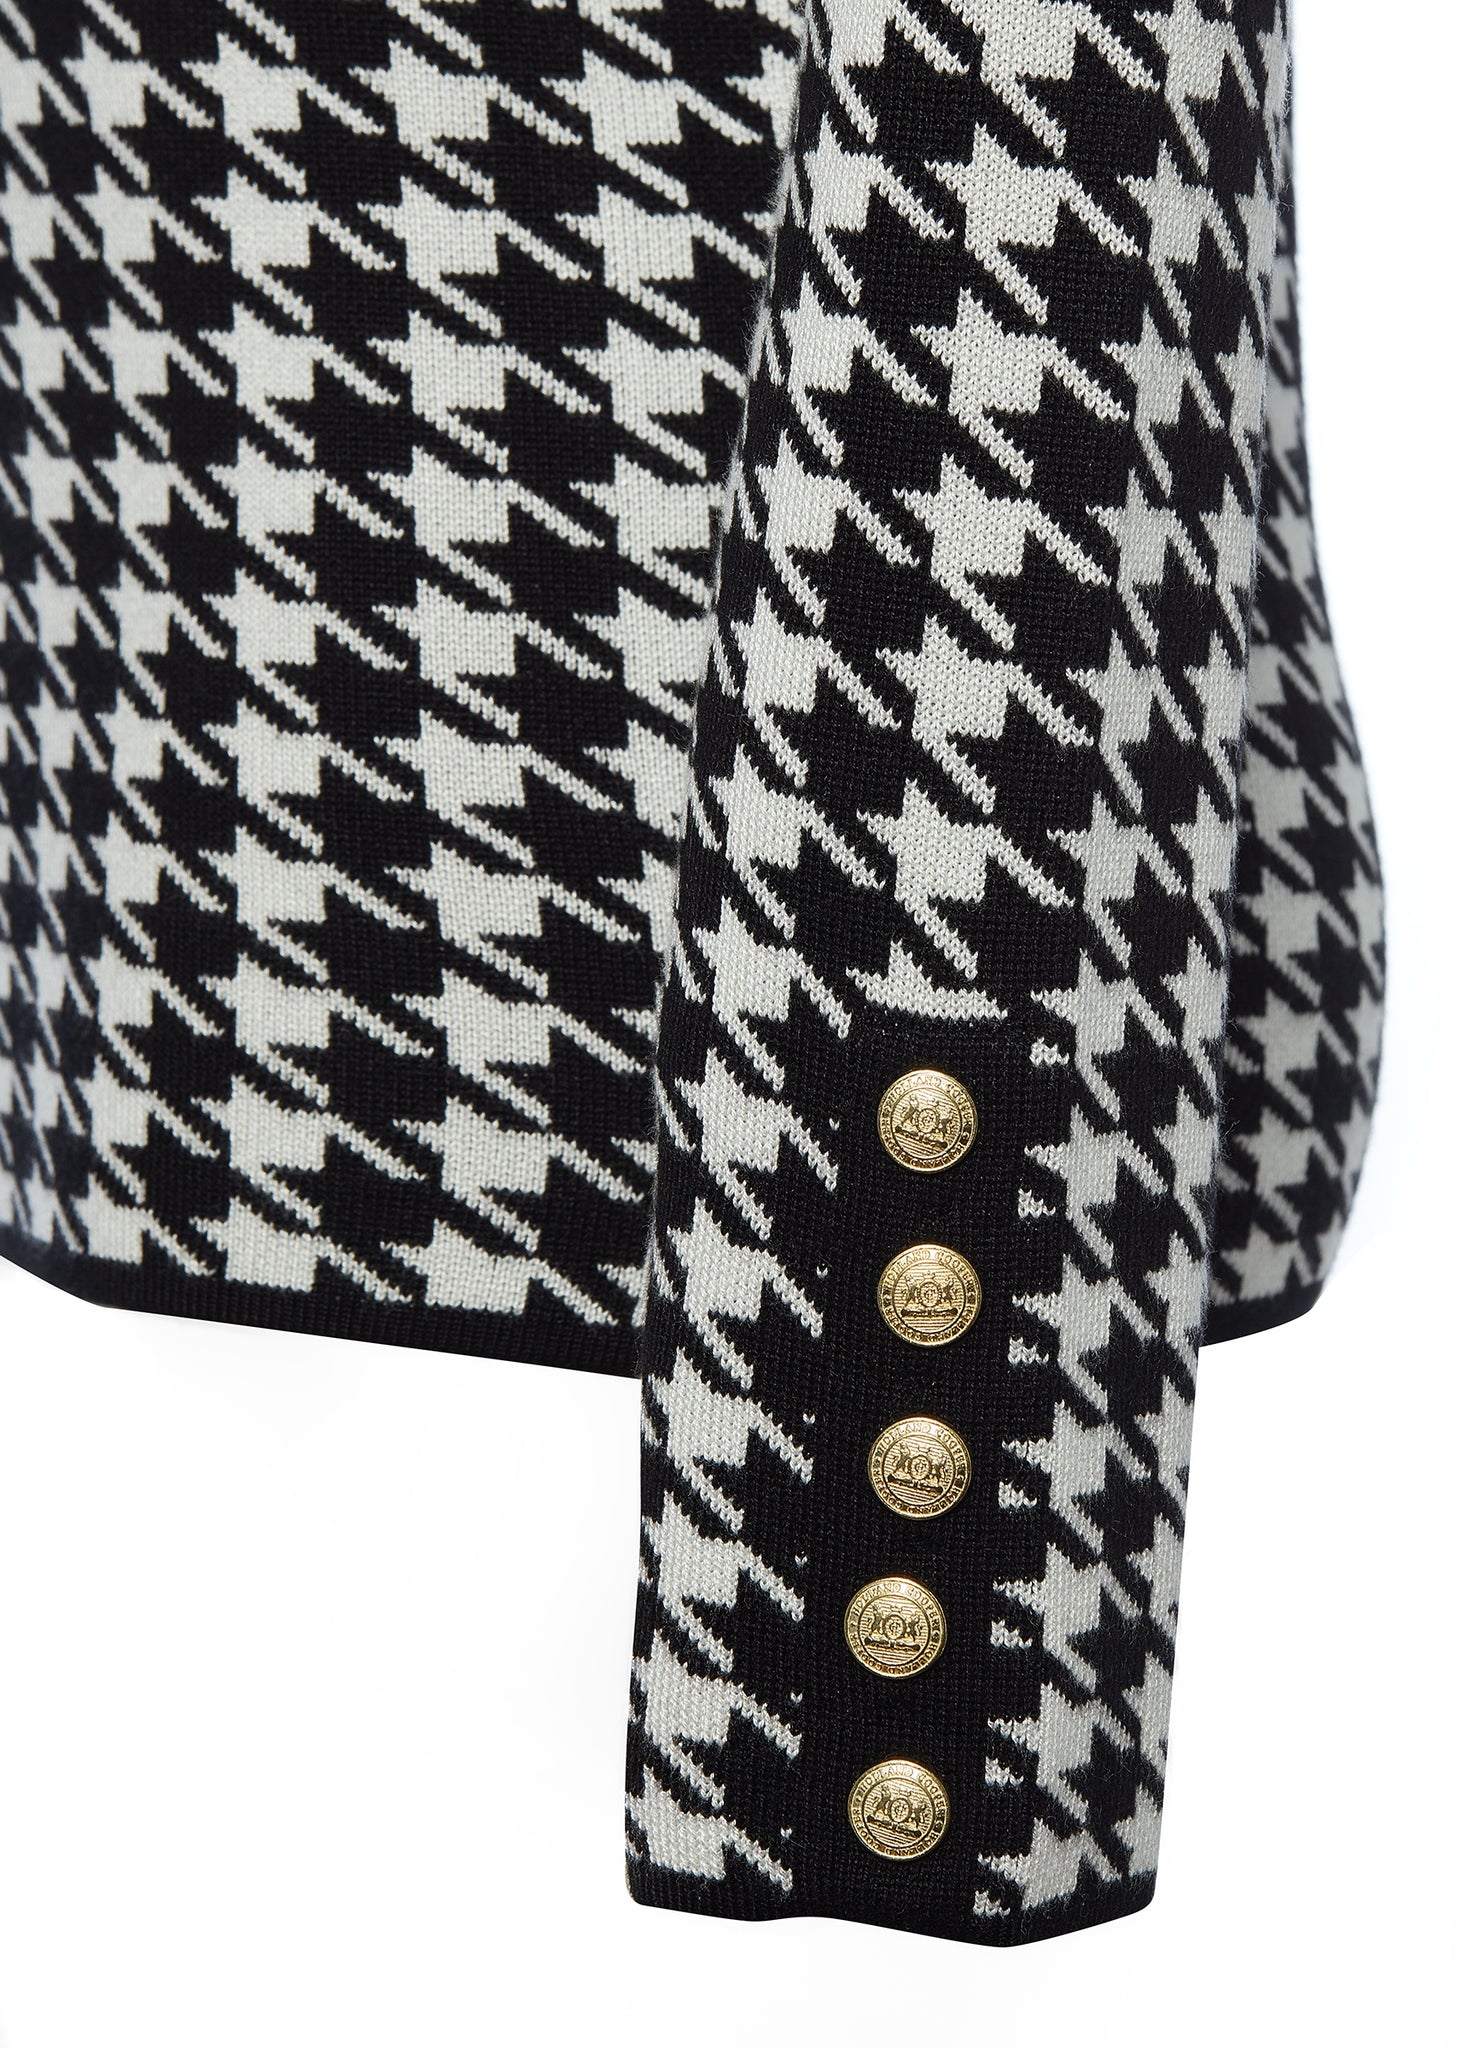 gold button detail on cuffs of a classic black and white houndstooth jumper with contrast black roll neck collar